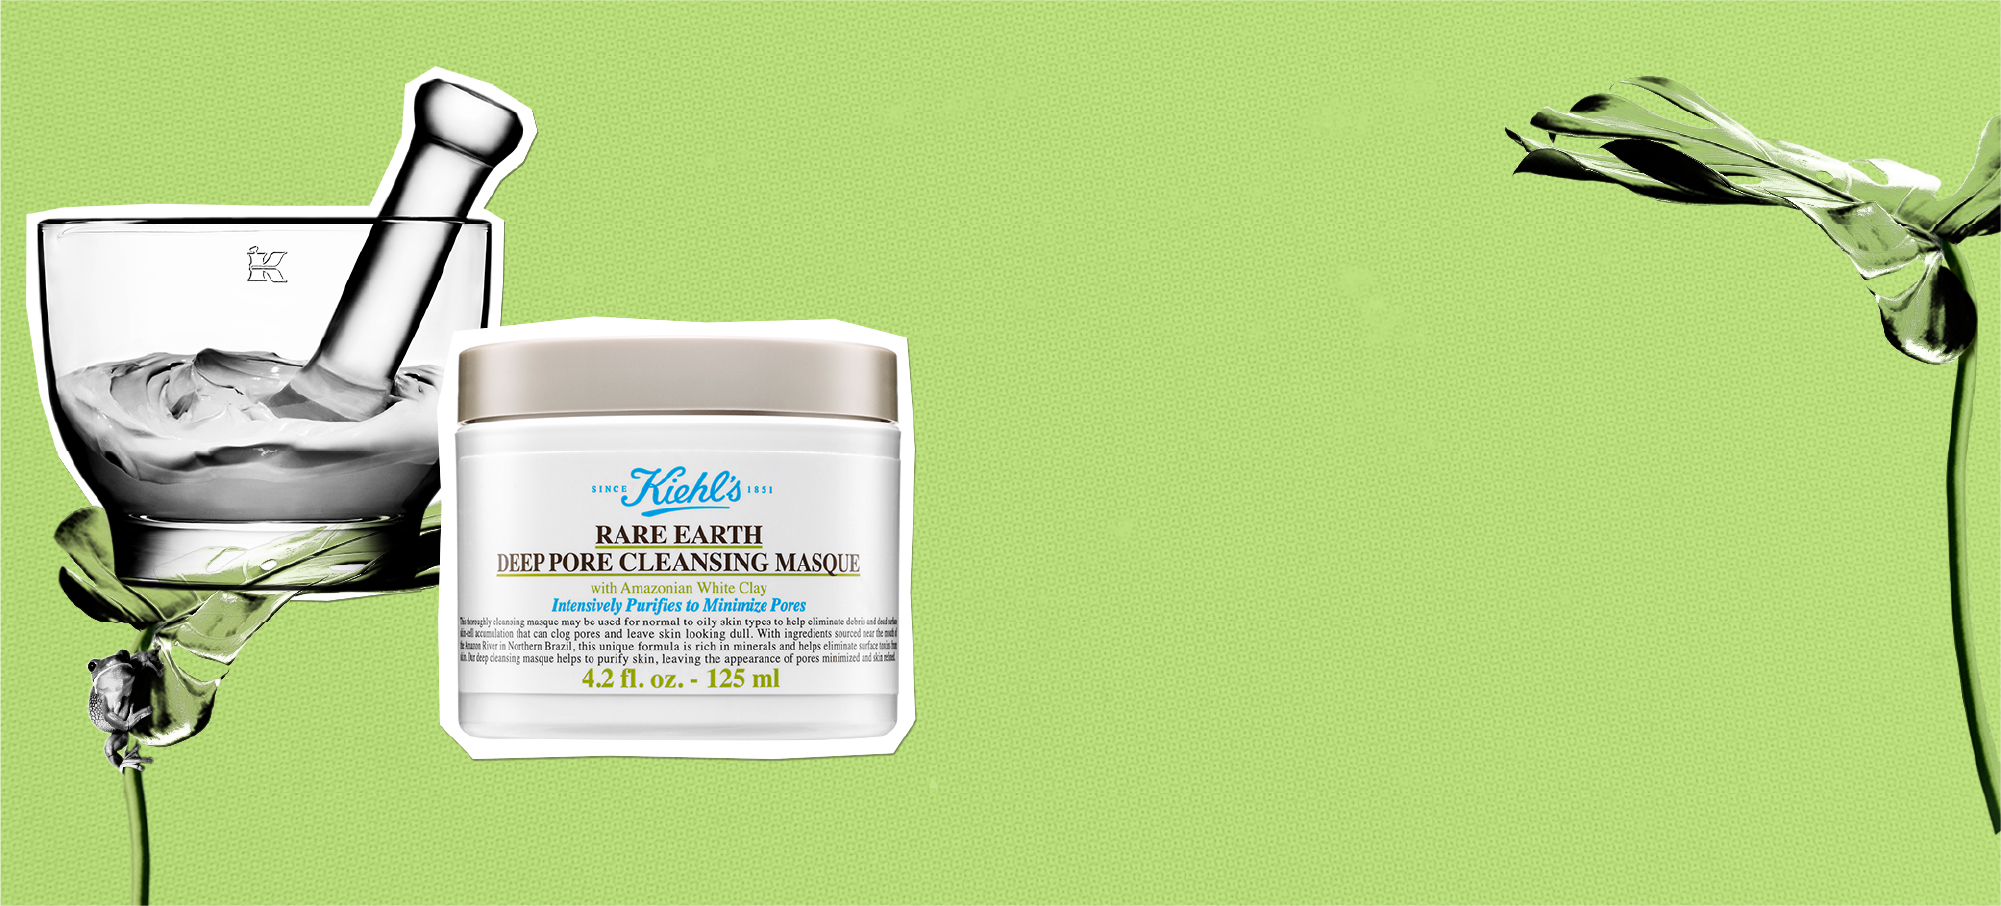 Kiehl’s hero product, Rare Earth Deep Pore Cleansing Masque that helping to minimize pores